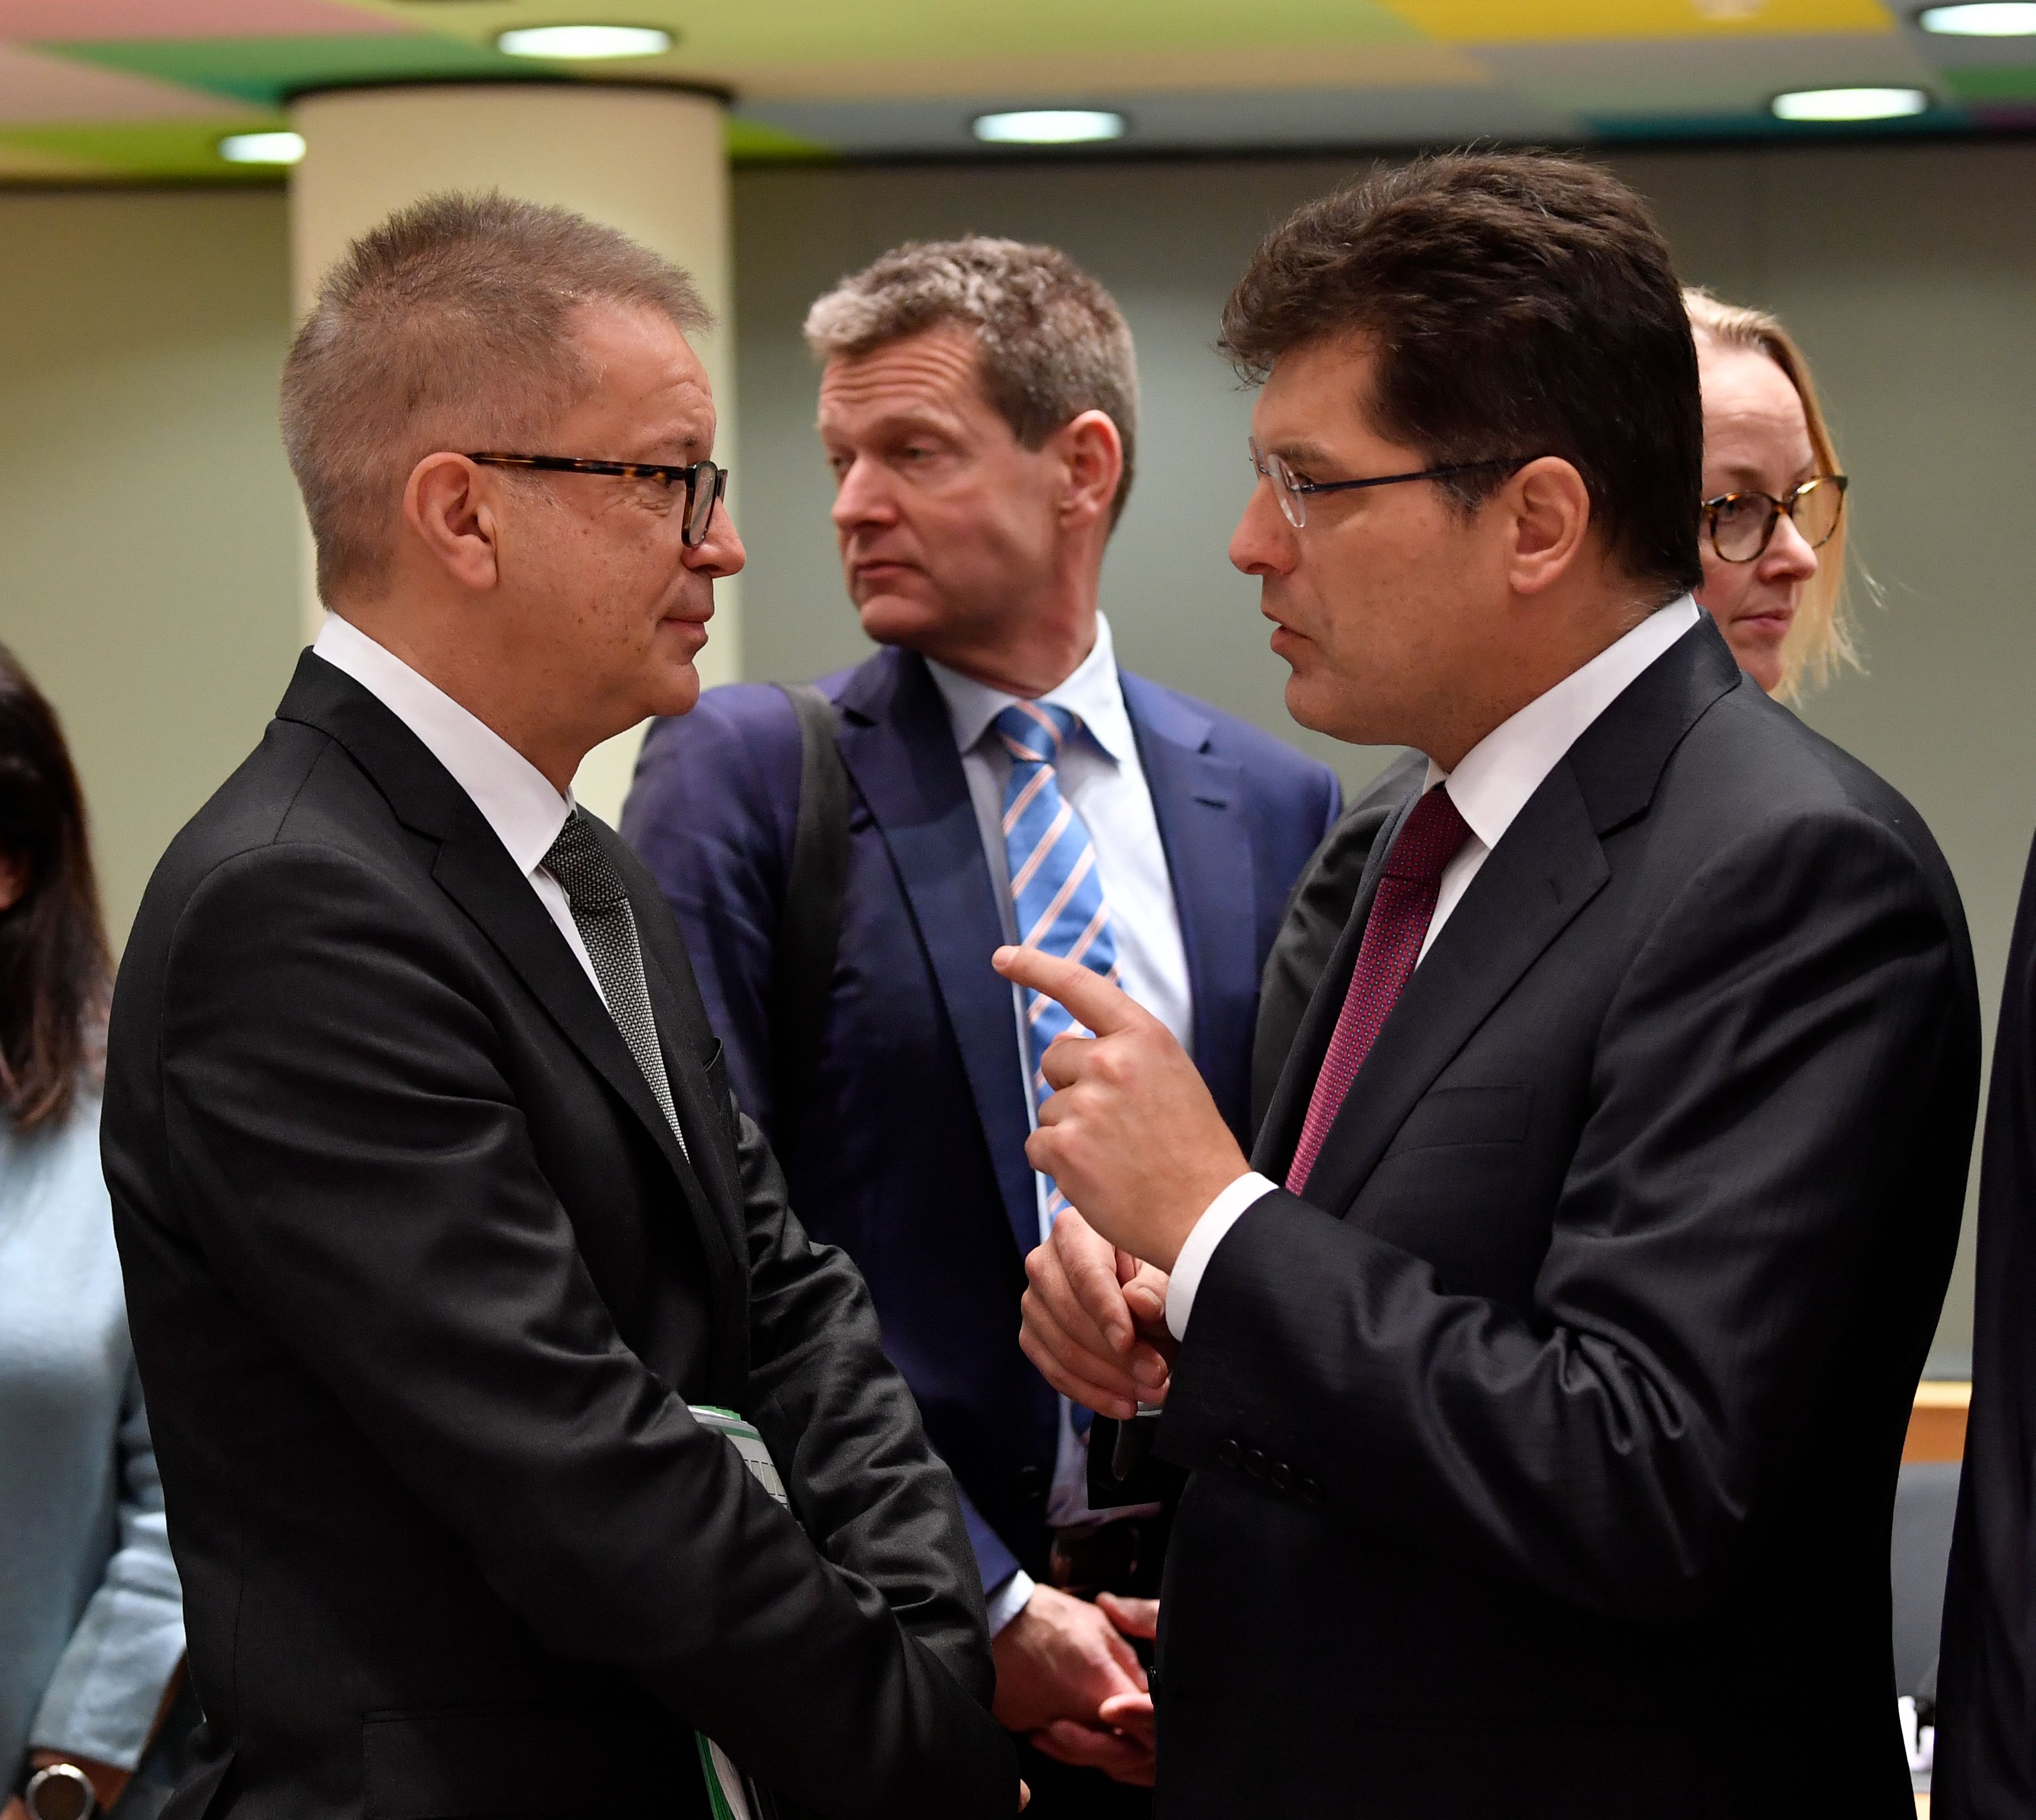 Austria's Minister for Social Affairs Rudolf Anschober, left, talks with European Commissioner for Crisis Management Janez Lenarcic during the Ministers of Health meeting on the coronavirus in Brussels on Thursday.